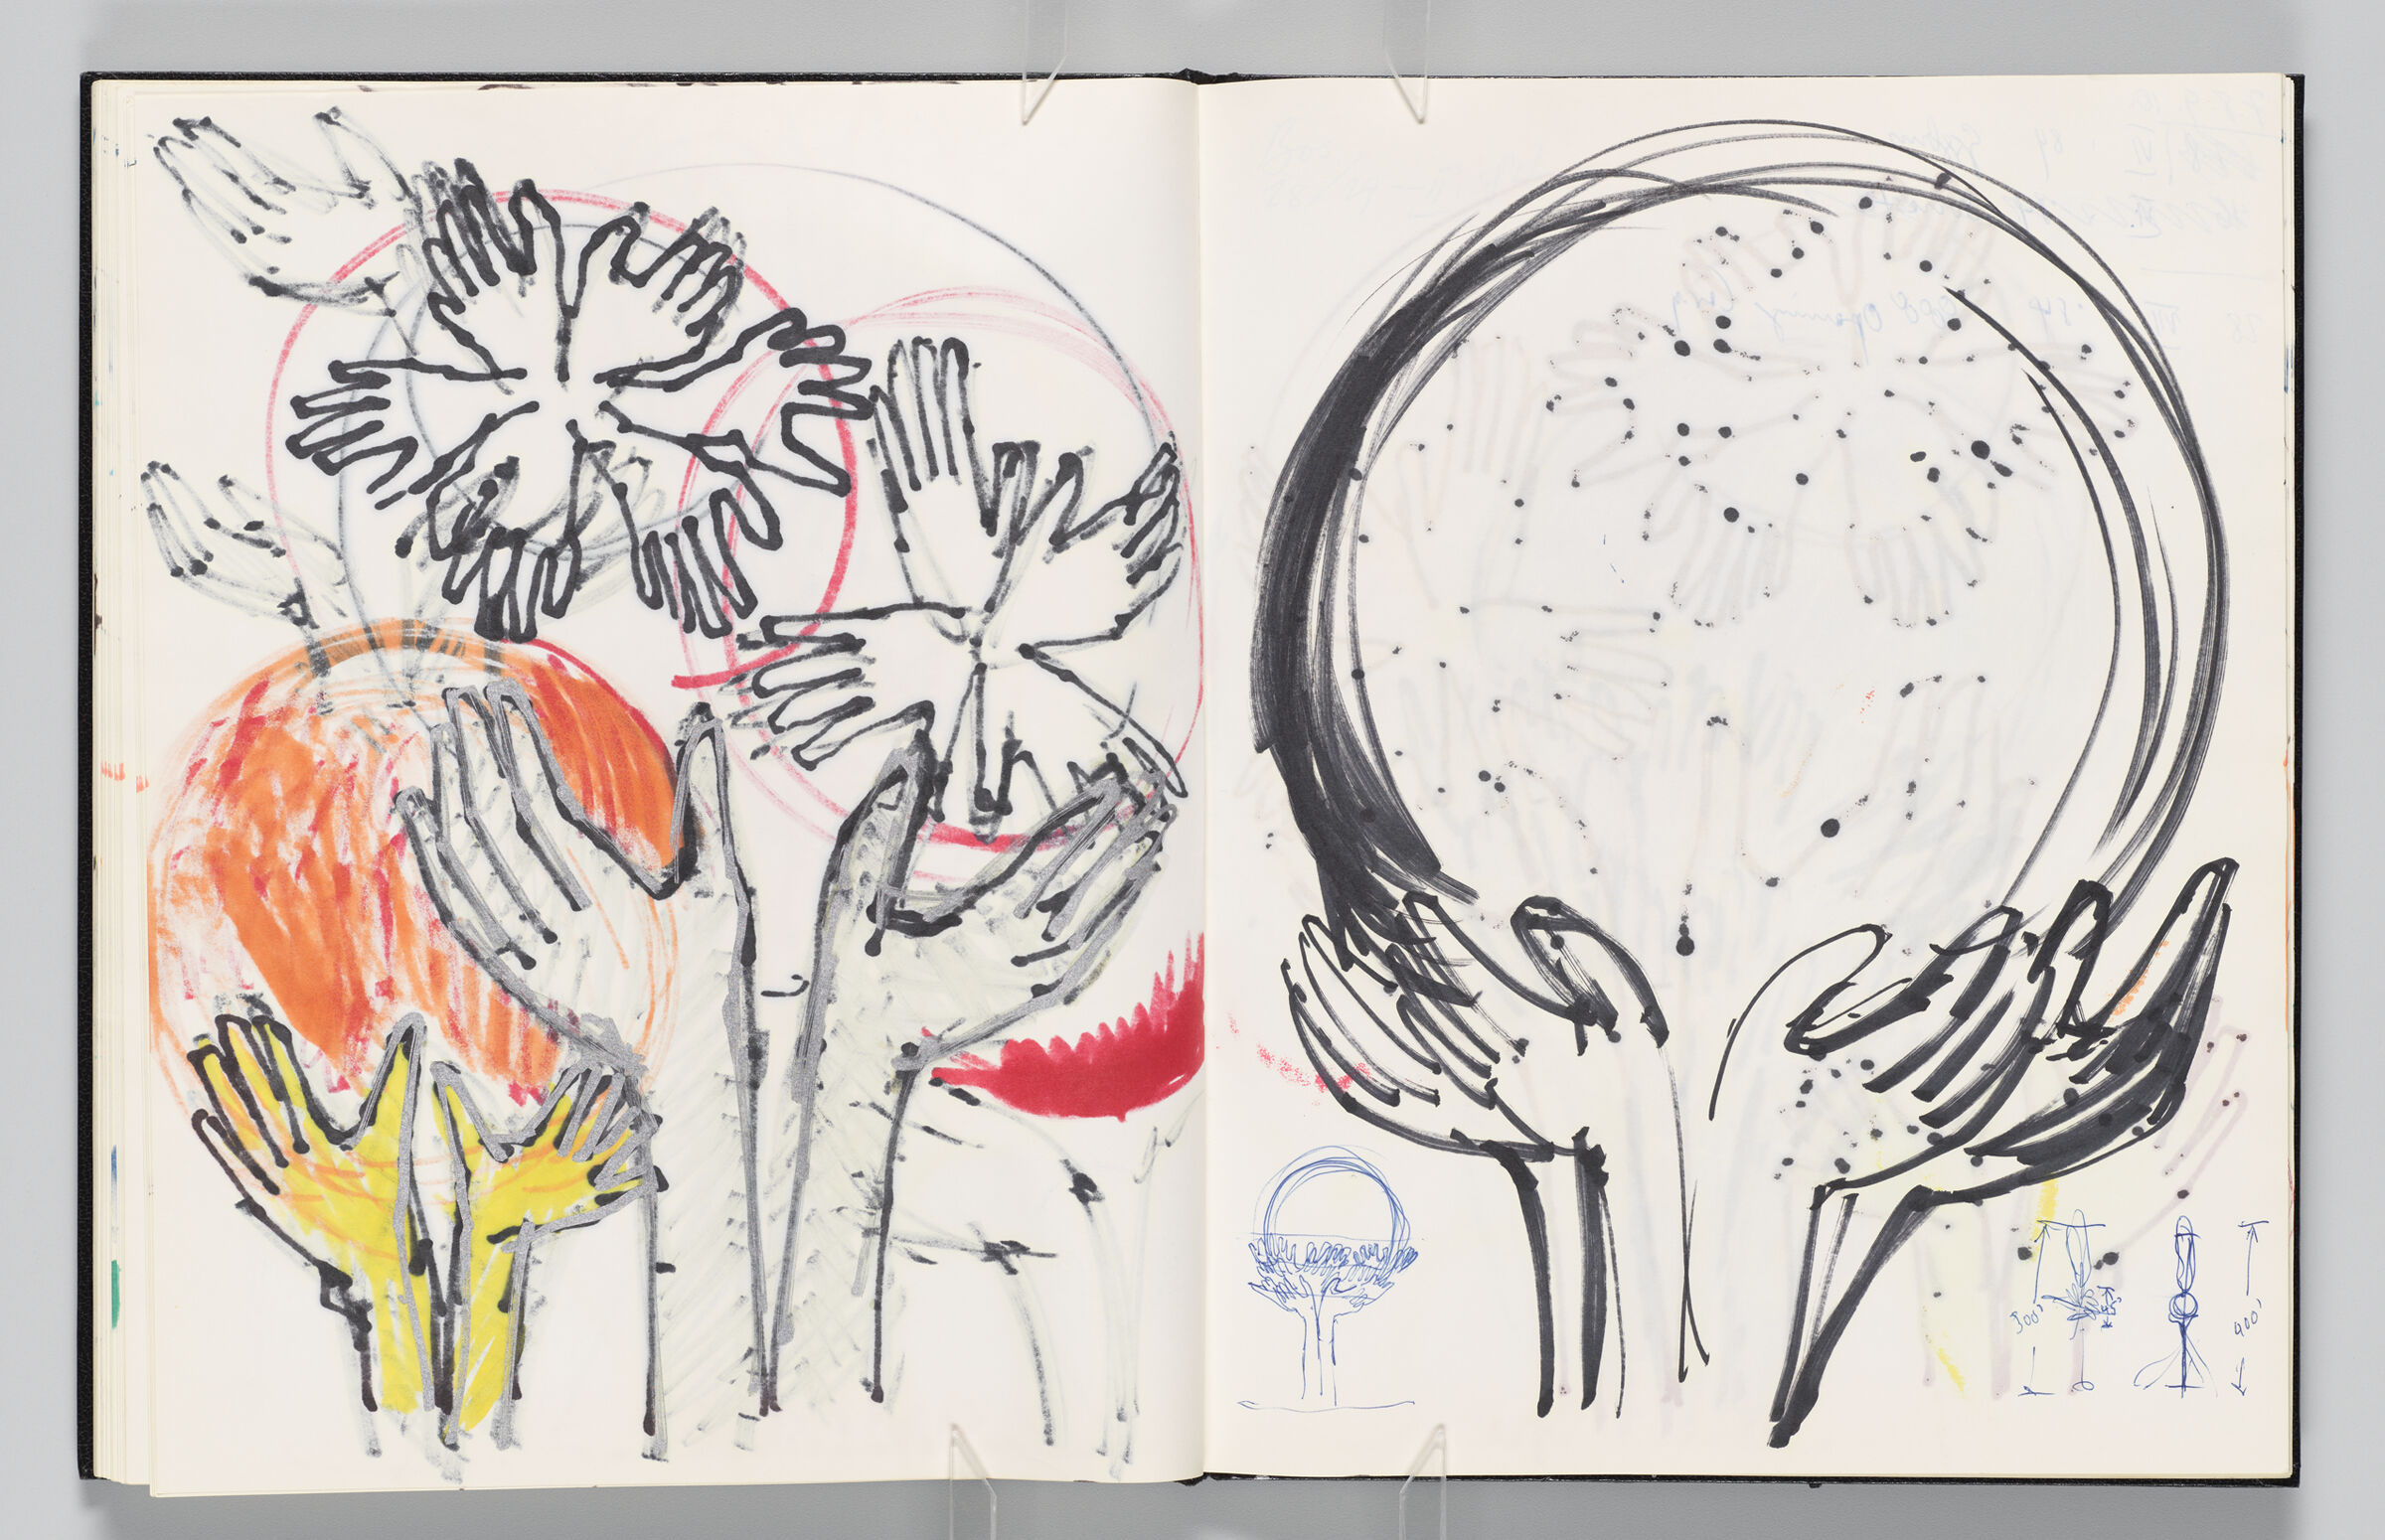 Untitled (Bleed-Through Of Previous Page, Left Page); Untitled (Hands Holding Globes, Right Page)